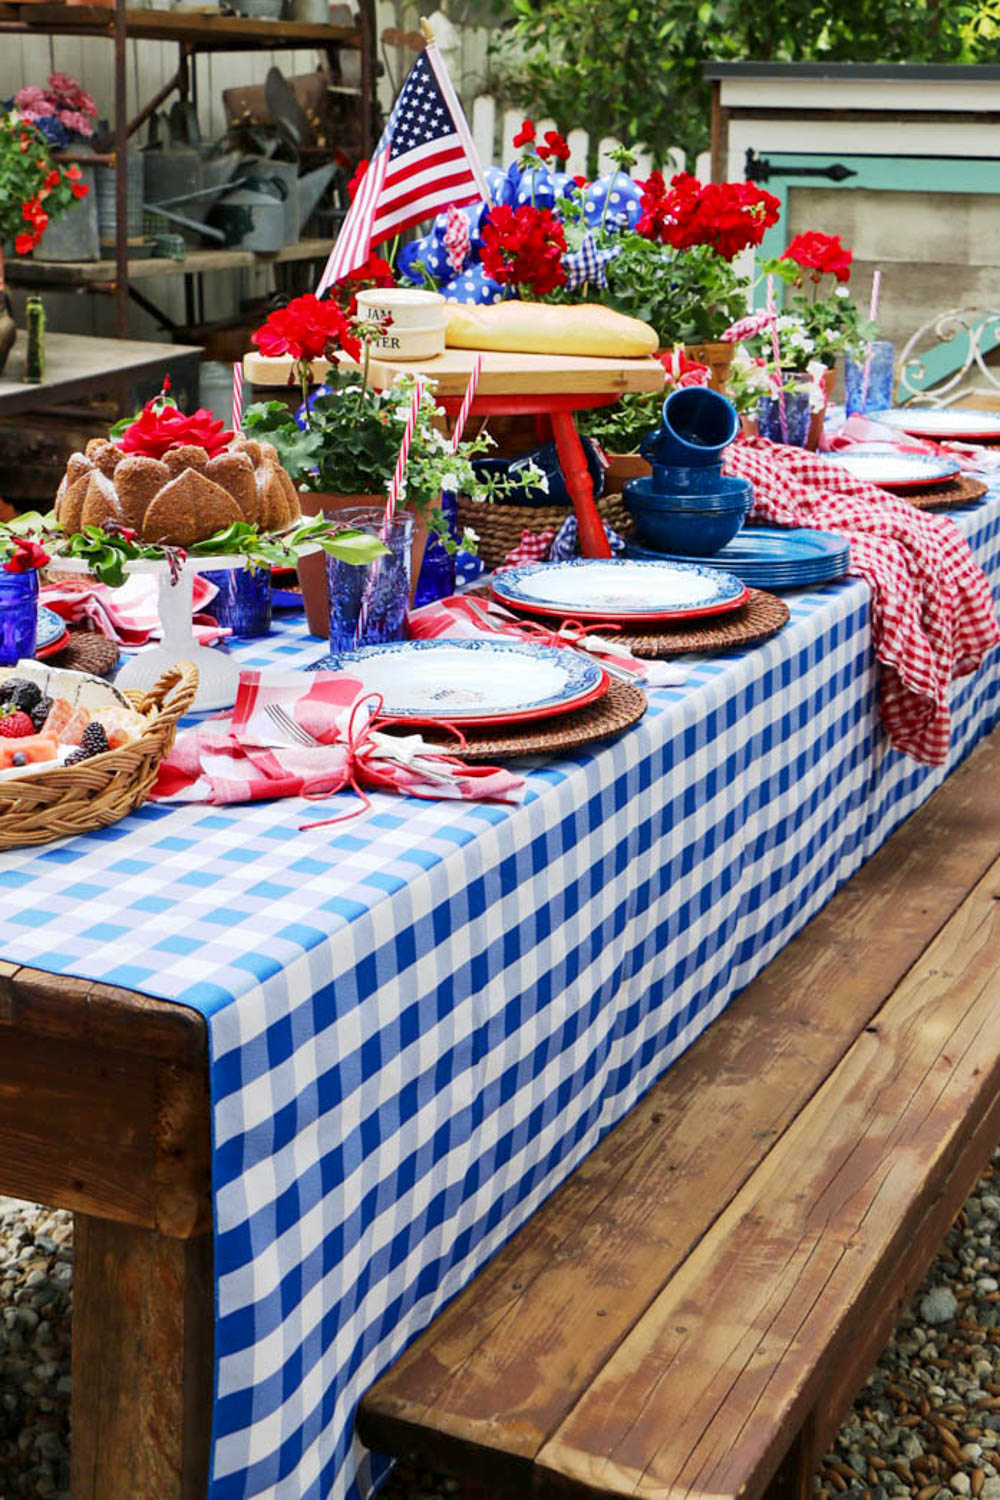 The table was decorated for the party with red, white, and blue, and a checkered tablecloth with a picnic basket filled with red geraniums. Flags are hanging on the fence for decoration. A pile of enamel dishes is sitting on the table.